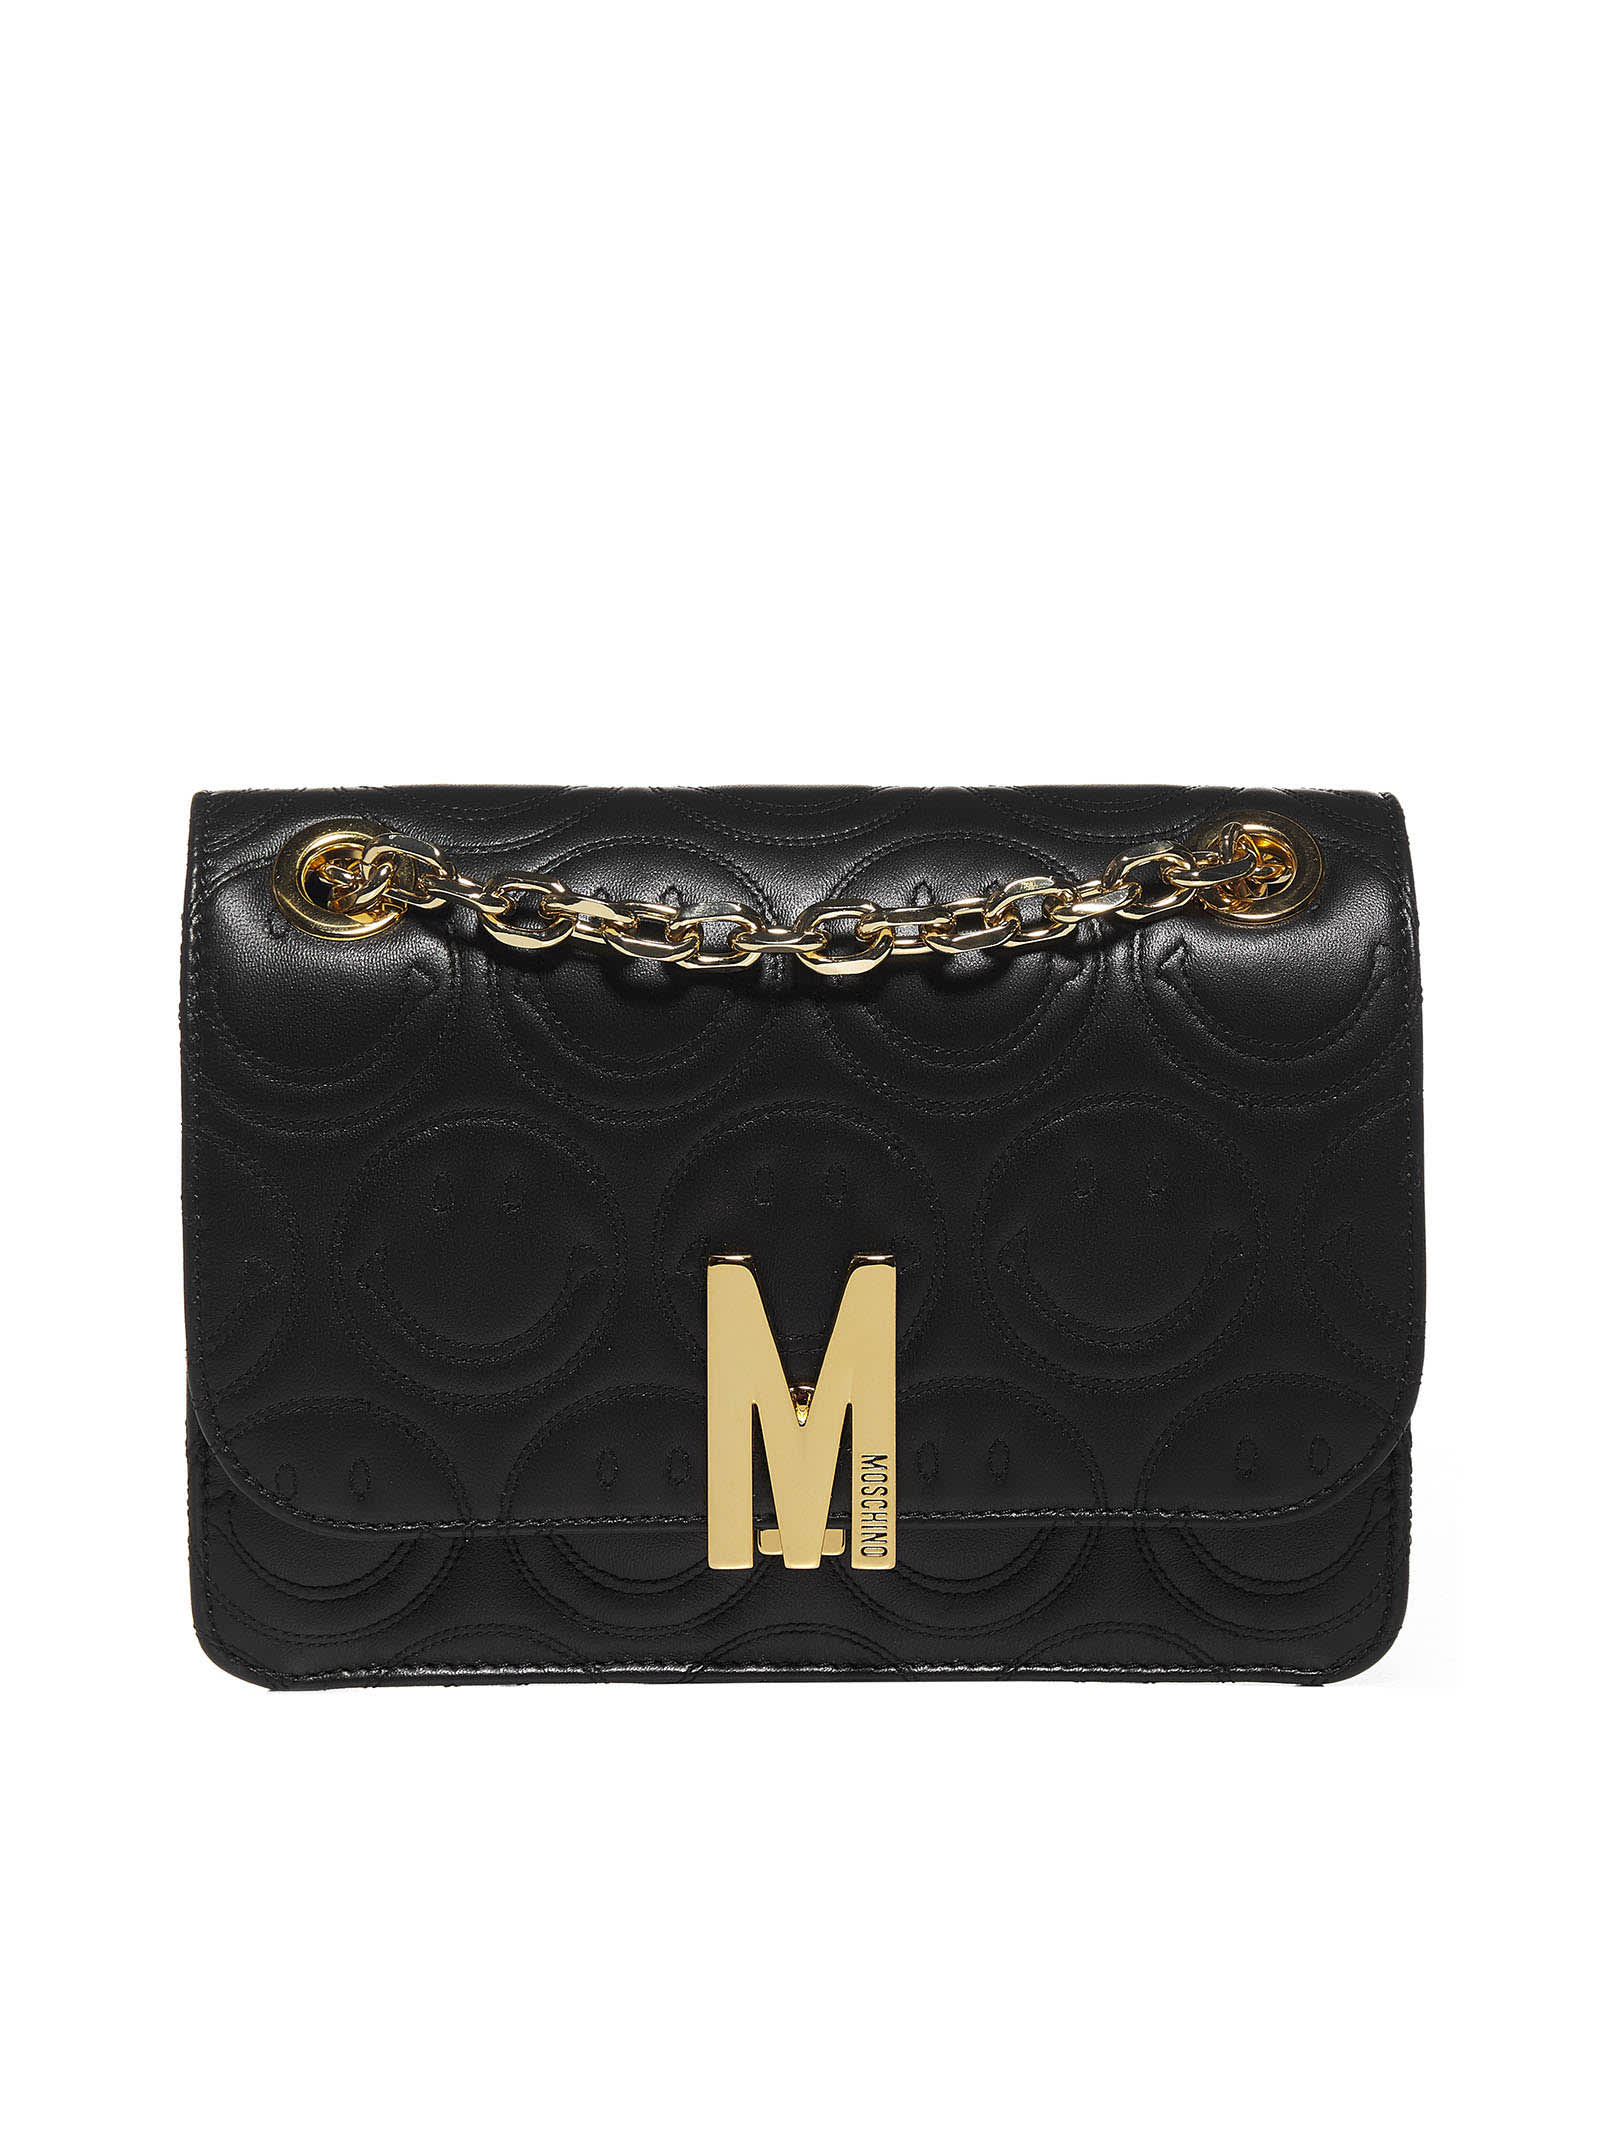 Moschino M Smiley Nappa Leather Shoulder Bag